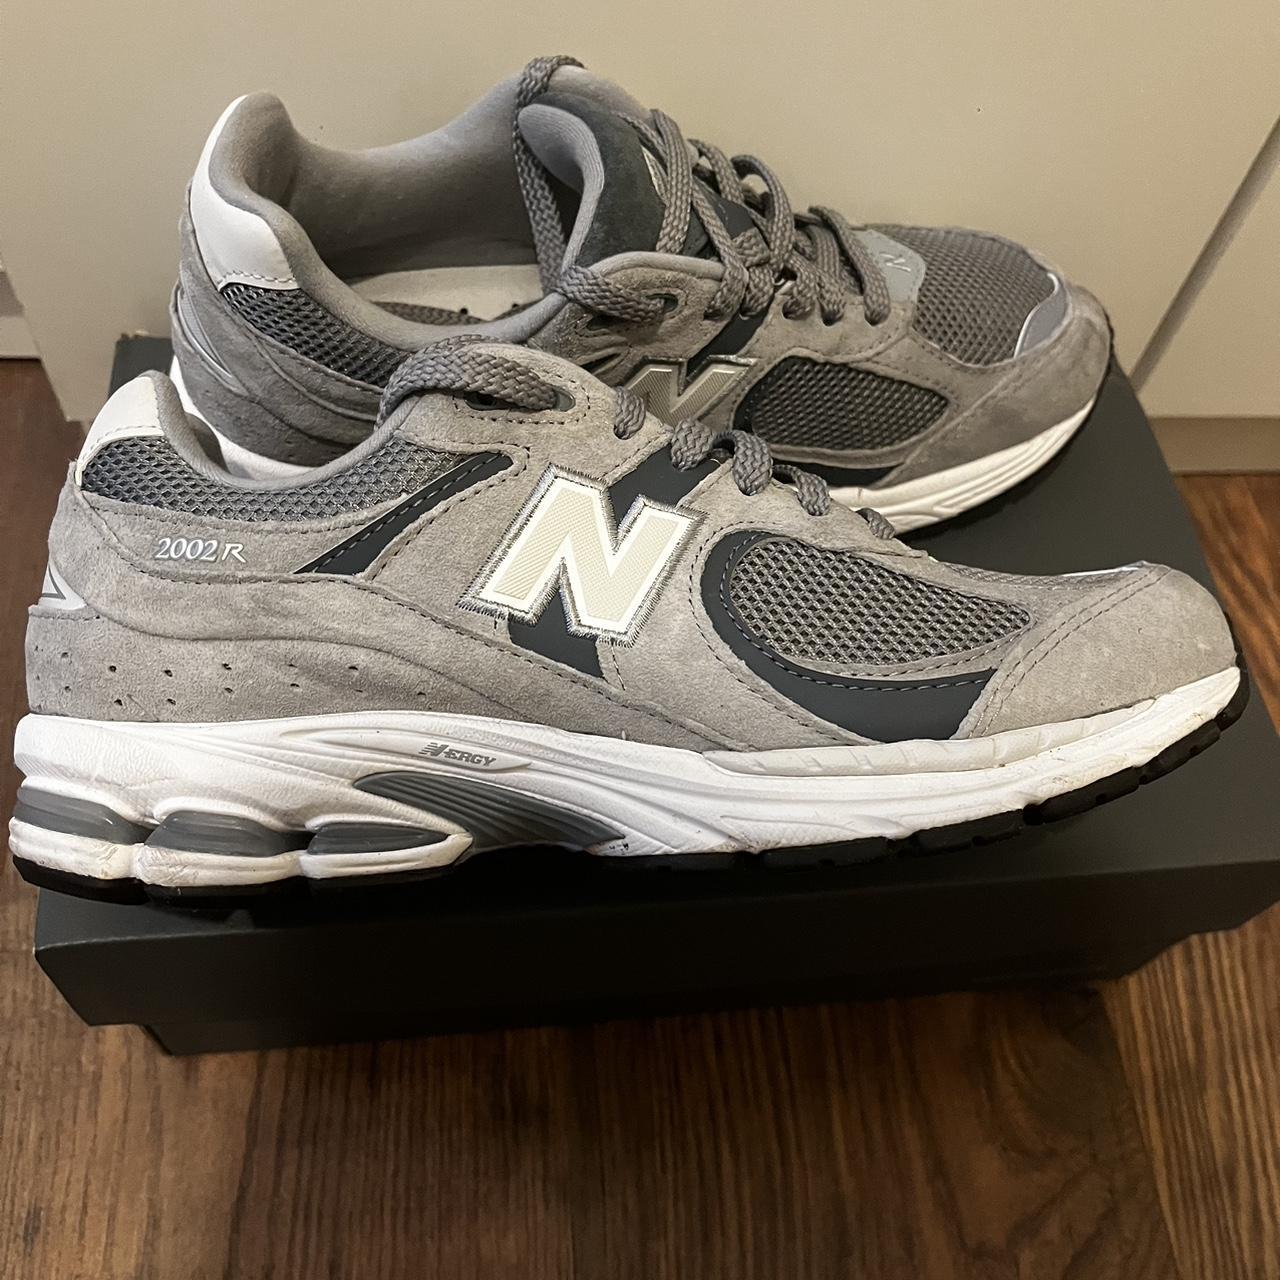 New Balance 2002R Steel Orca 2022 Barely worn, only... - Depop